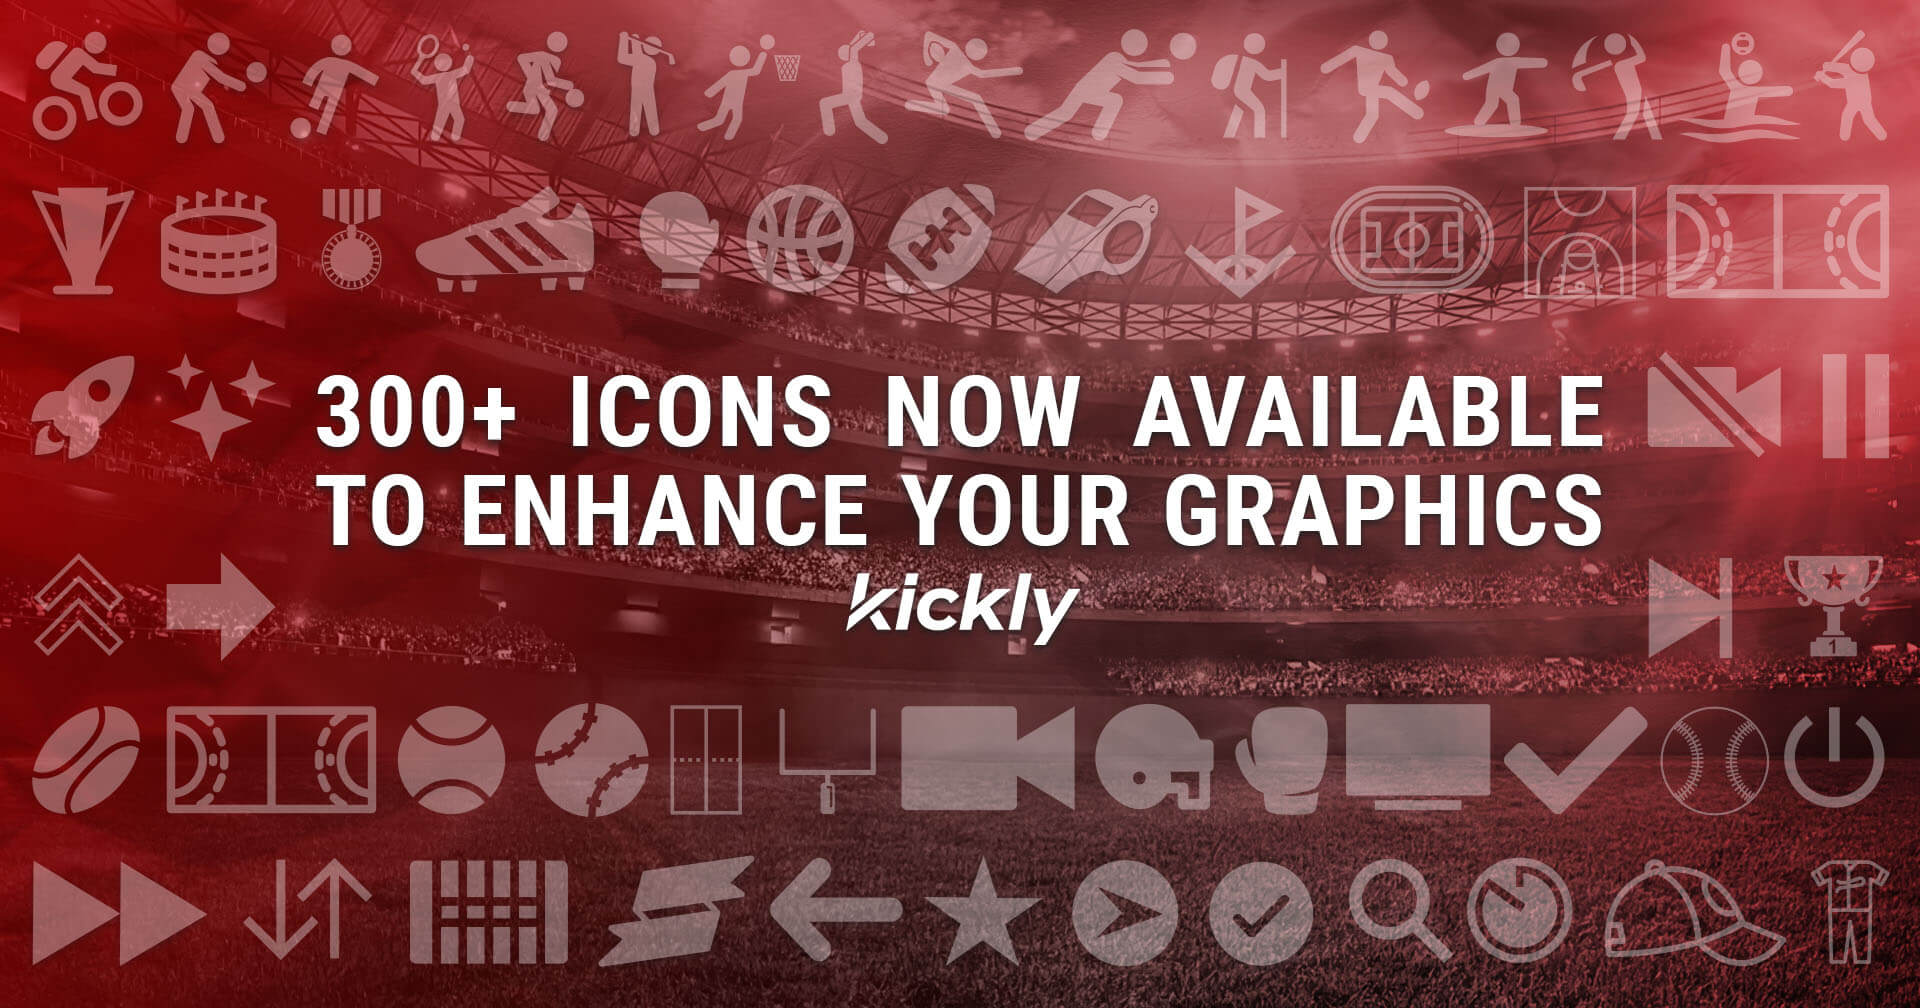 New Feature Alert: utilize more than 300 sport icons to make your graphics look even better